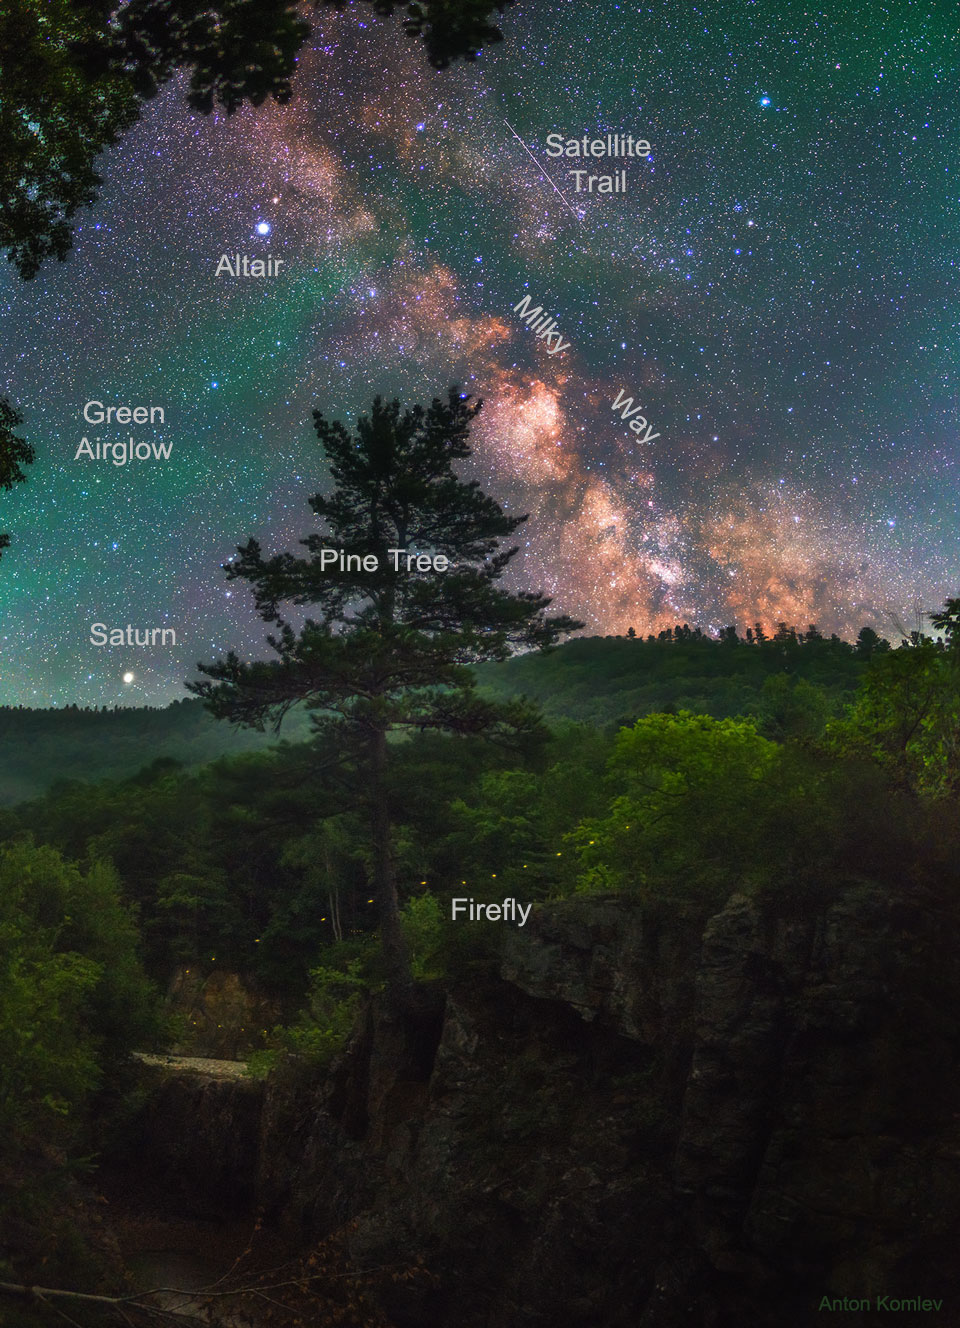 The picture shows an arching Milky Way Galaxy with a firefly
path in the foreground over Russia.
Please see the explanation for more detailed information.